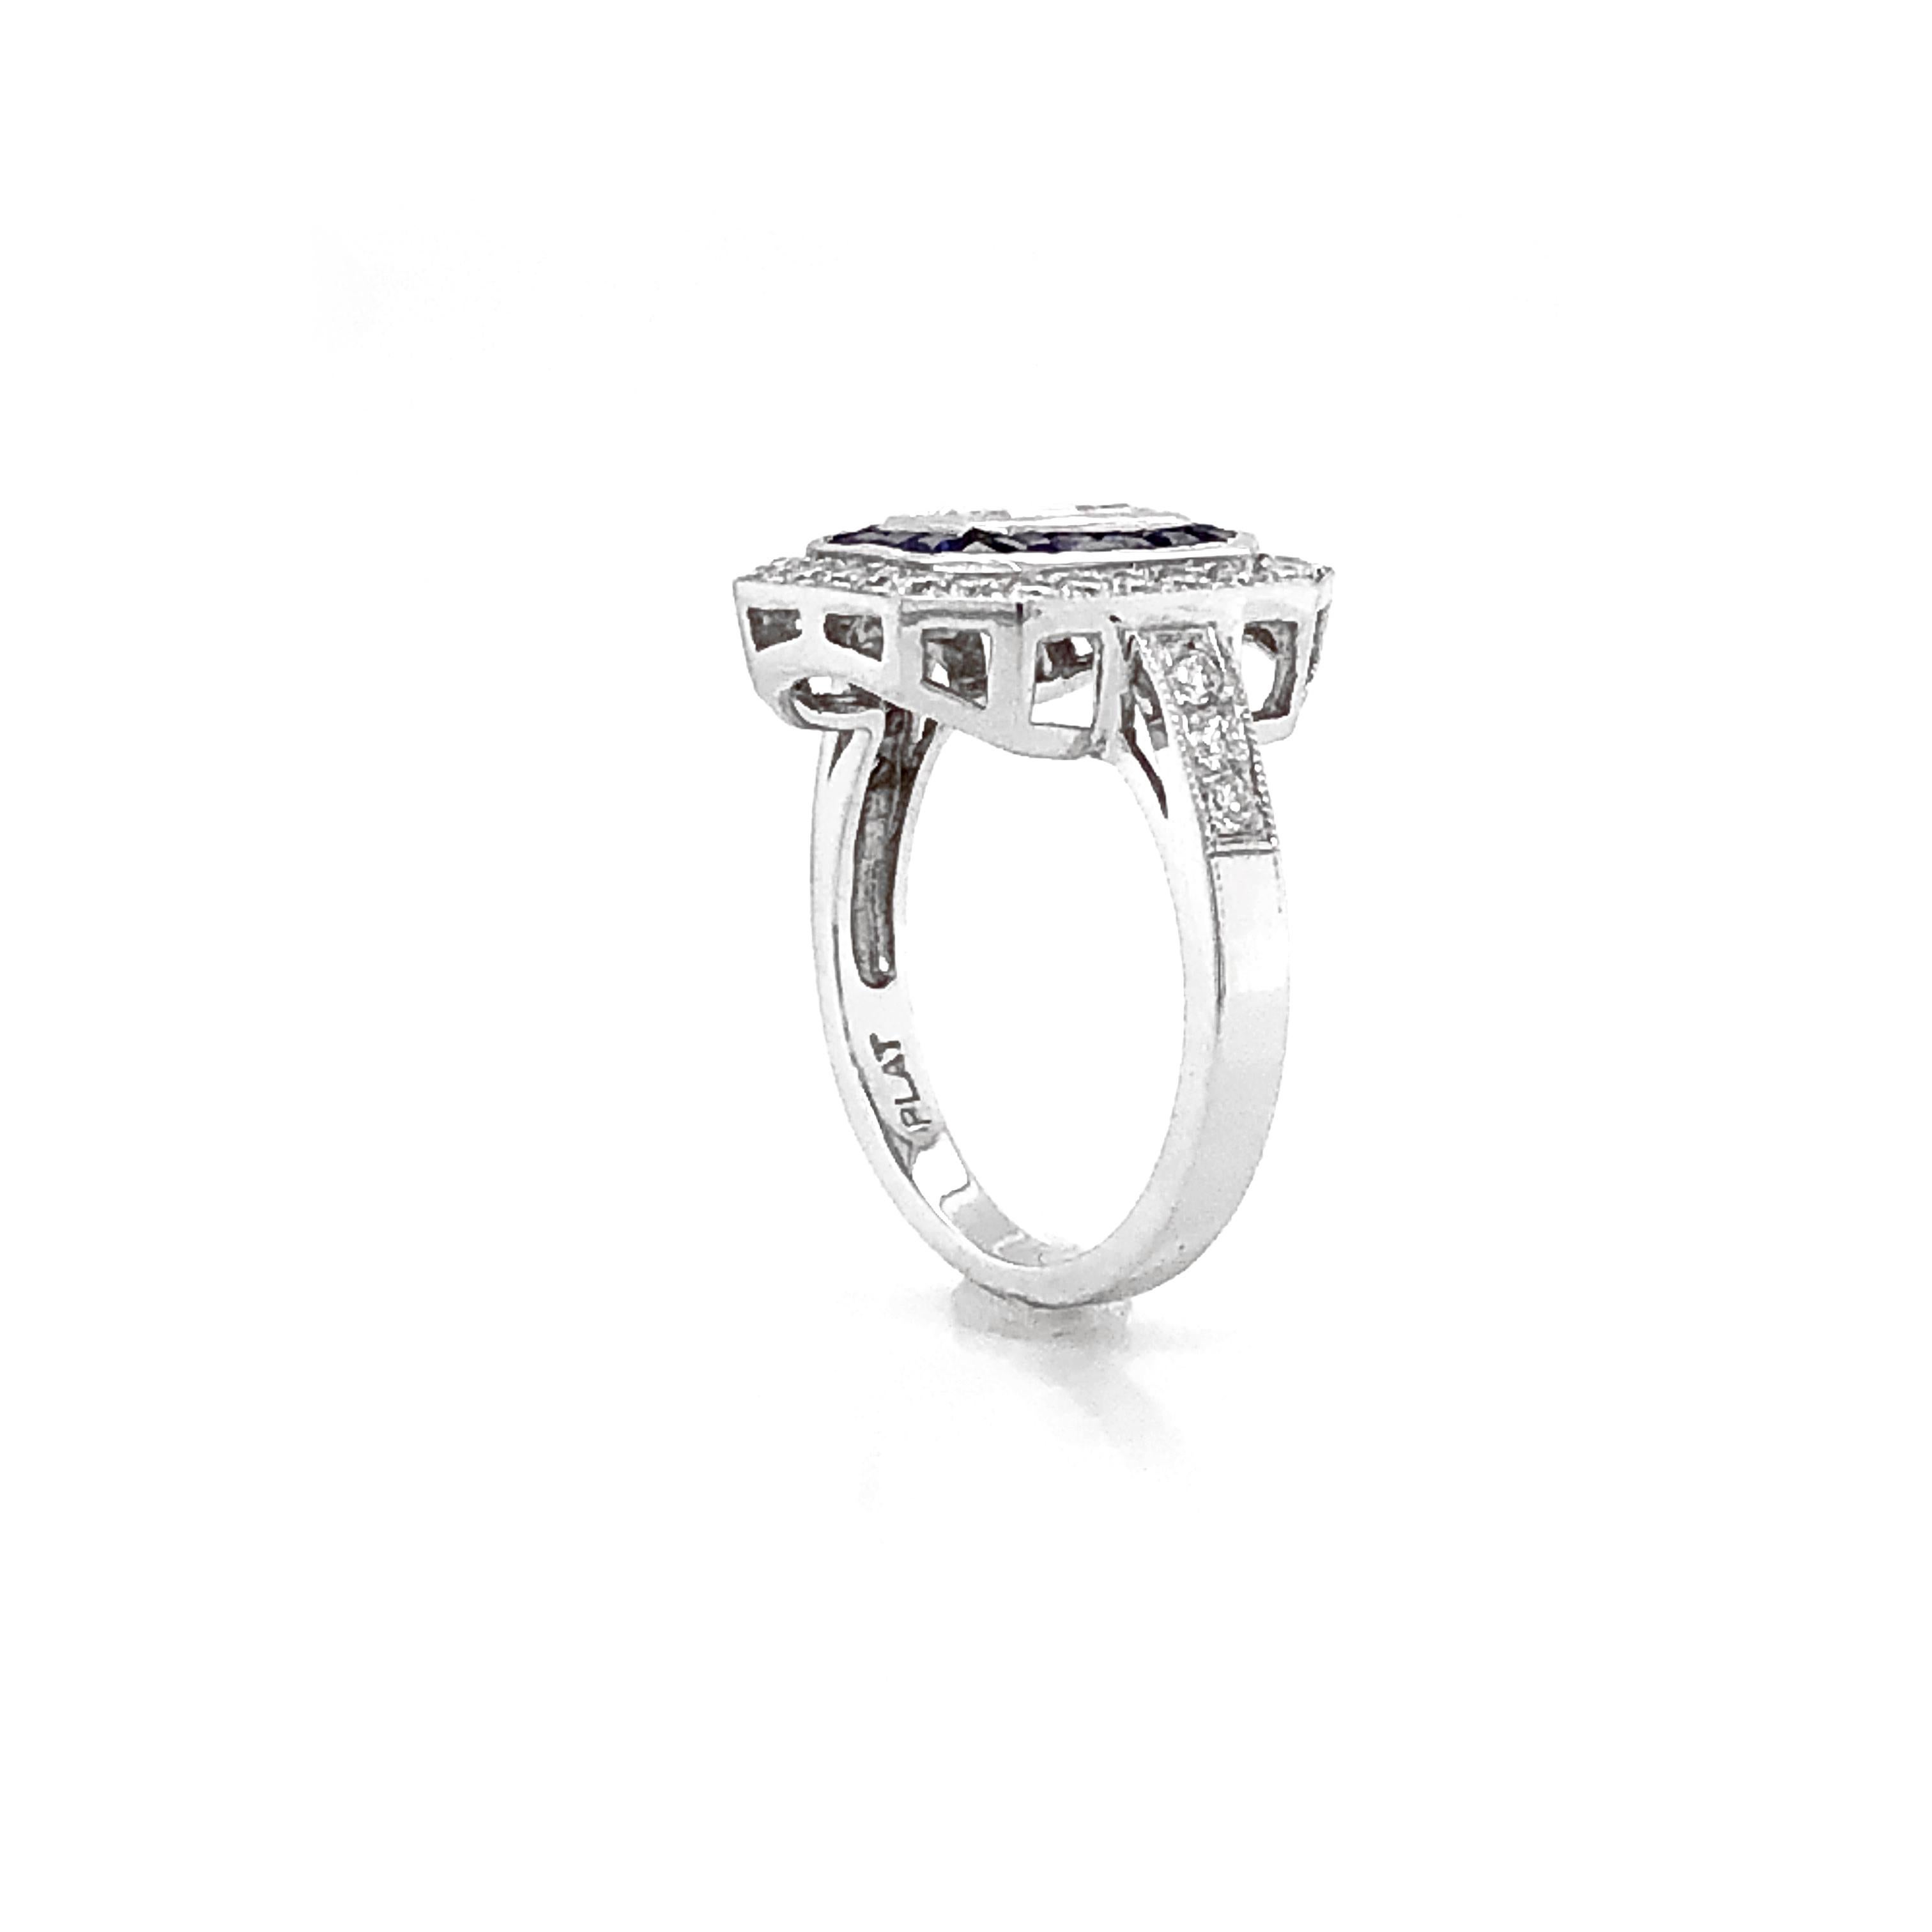 GIA Certified Emerald Cut Diamond 1.01 Carat Sapphires Diamonds Cocktail Ring For Sale 1